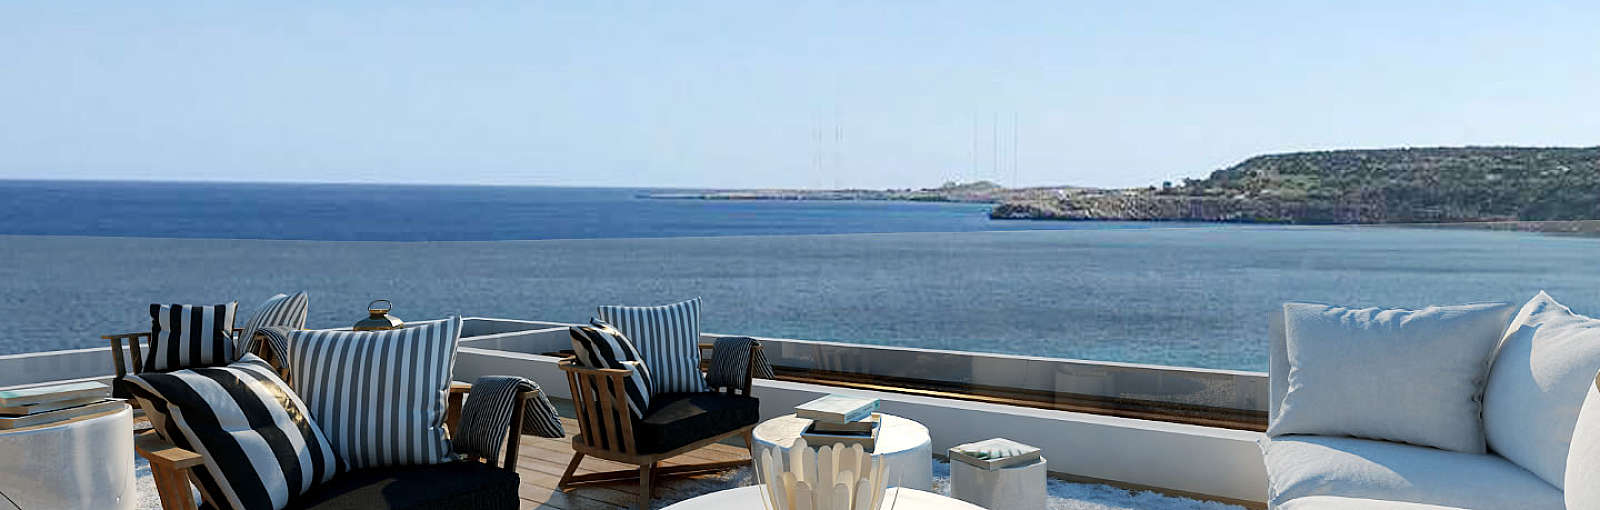 <span class="numbers">5</span> Bed­room Detached Lux­u­ry Sea Front Villa/​Cape&nbsp;Greco